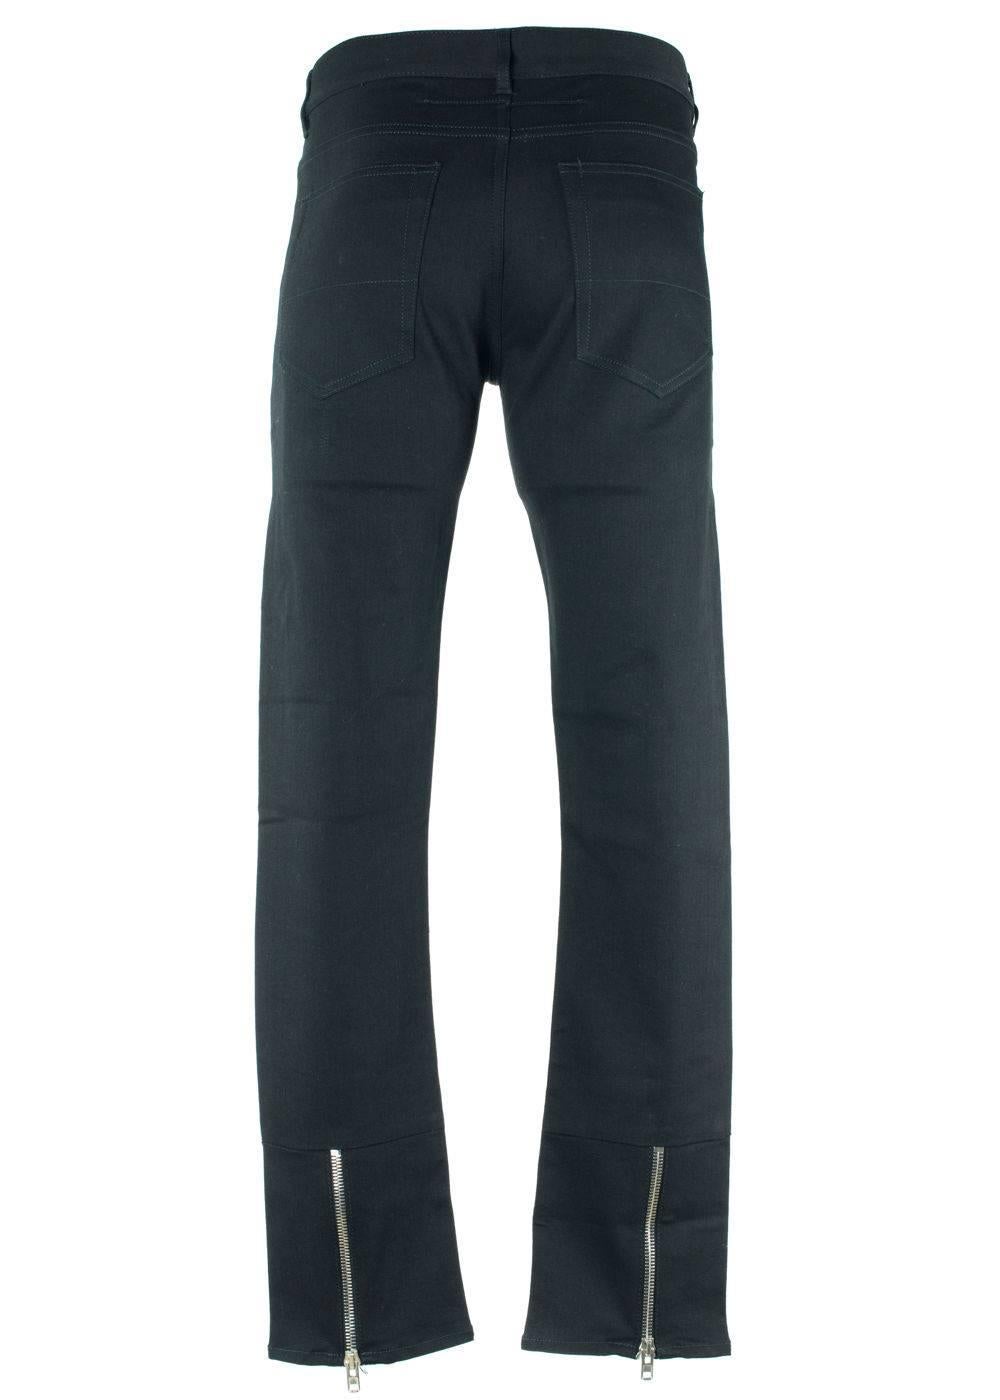 Givenchy Mens Solid Black Cotton Blend Jeans W/ Zipper In New Condition For Sale In Brooklyn, NY